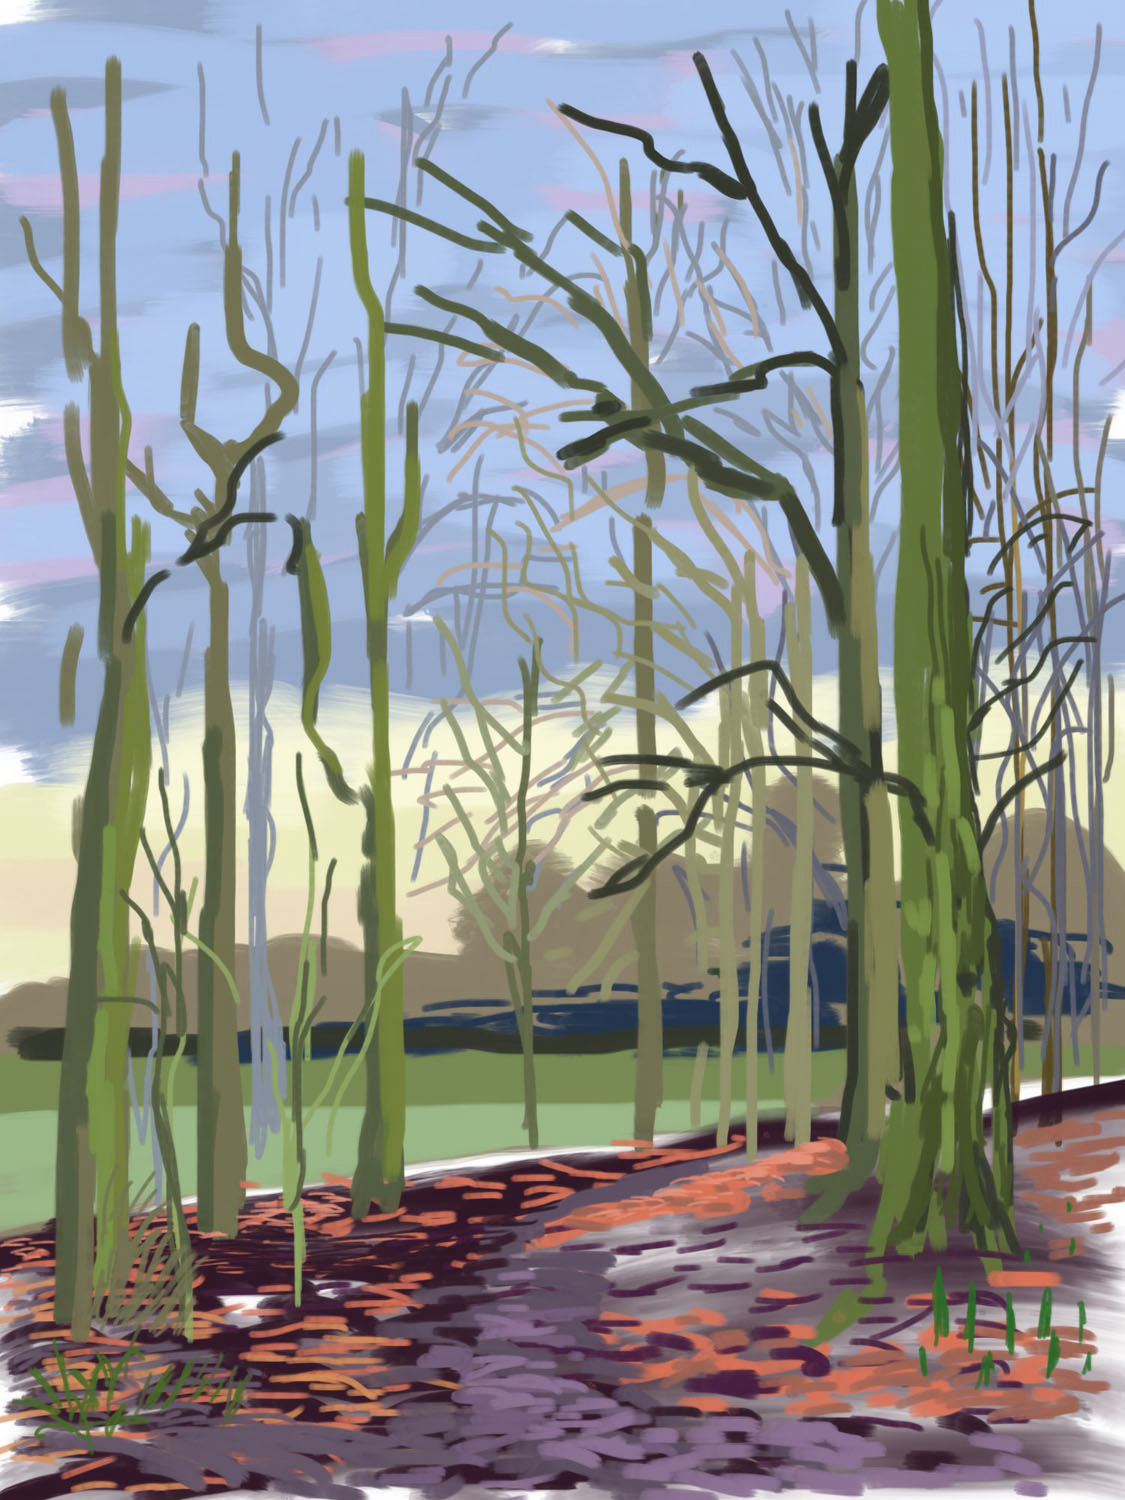 Andy Maitland, 2013, iPad Sketch, Reigate Priory Park, Surrey, UK. Winter. January 17th.